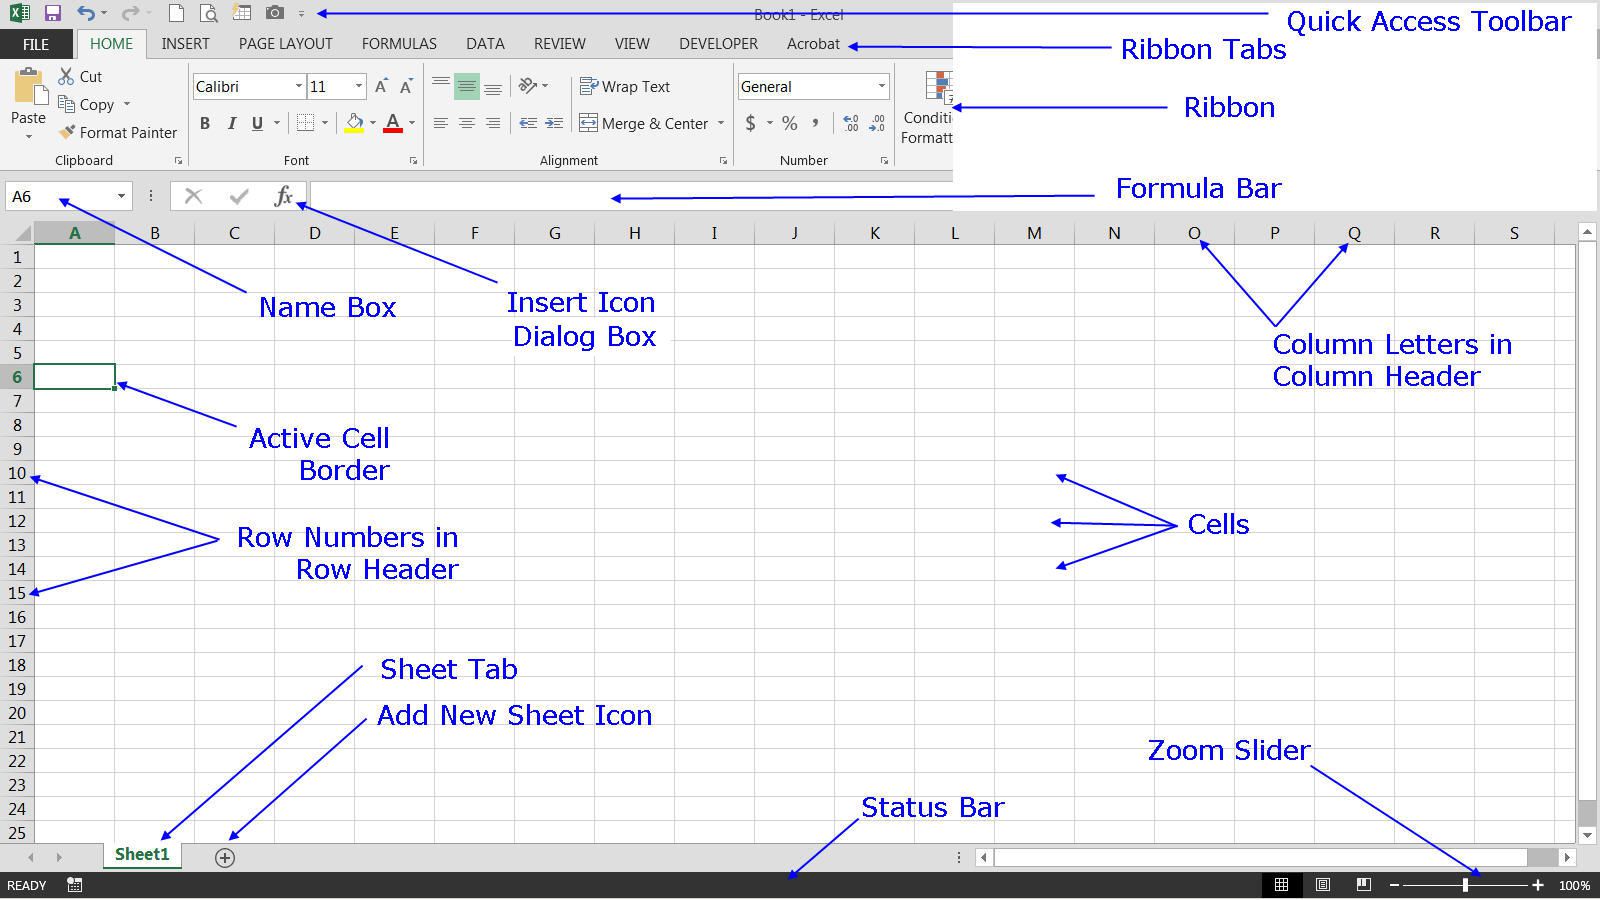 page layout view excel definition